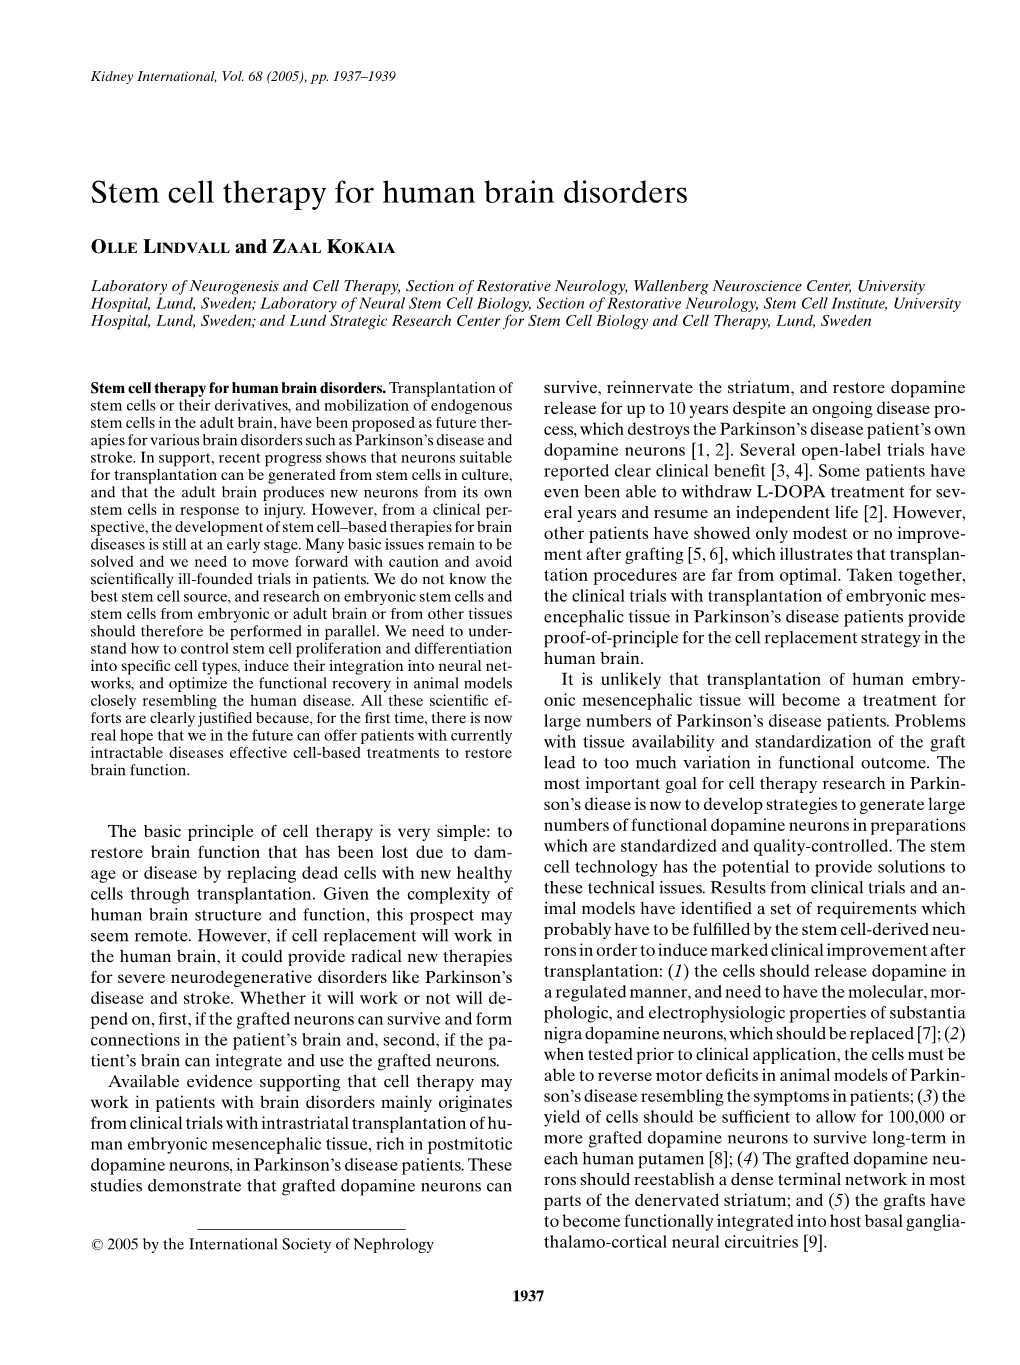 Stem Cell Therapy for Human Brain Disorders